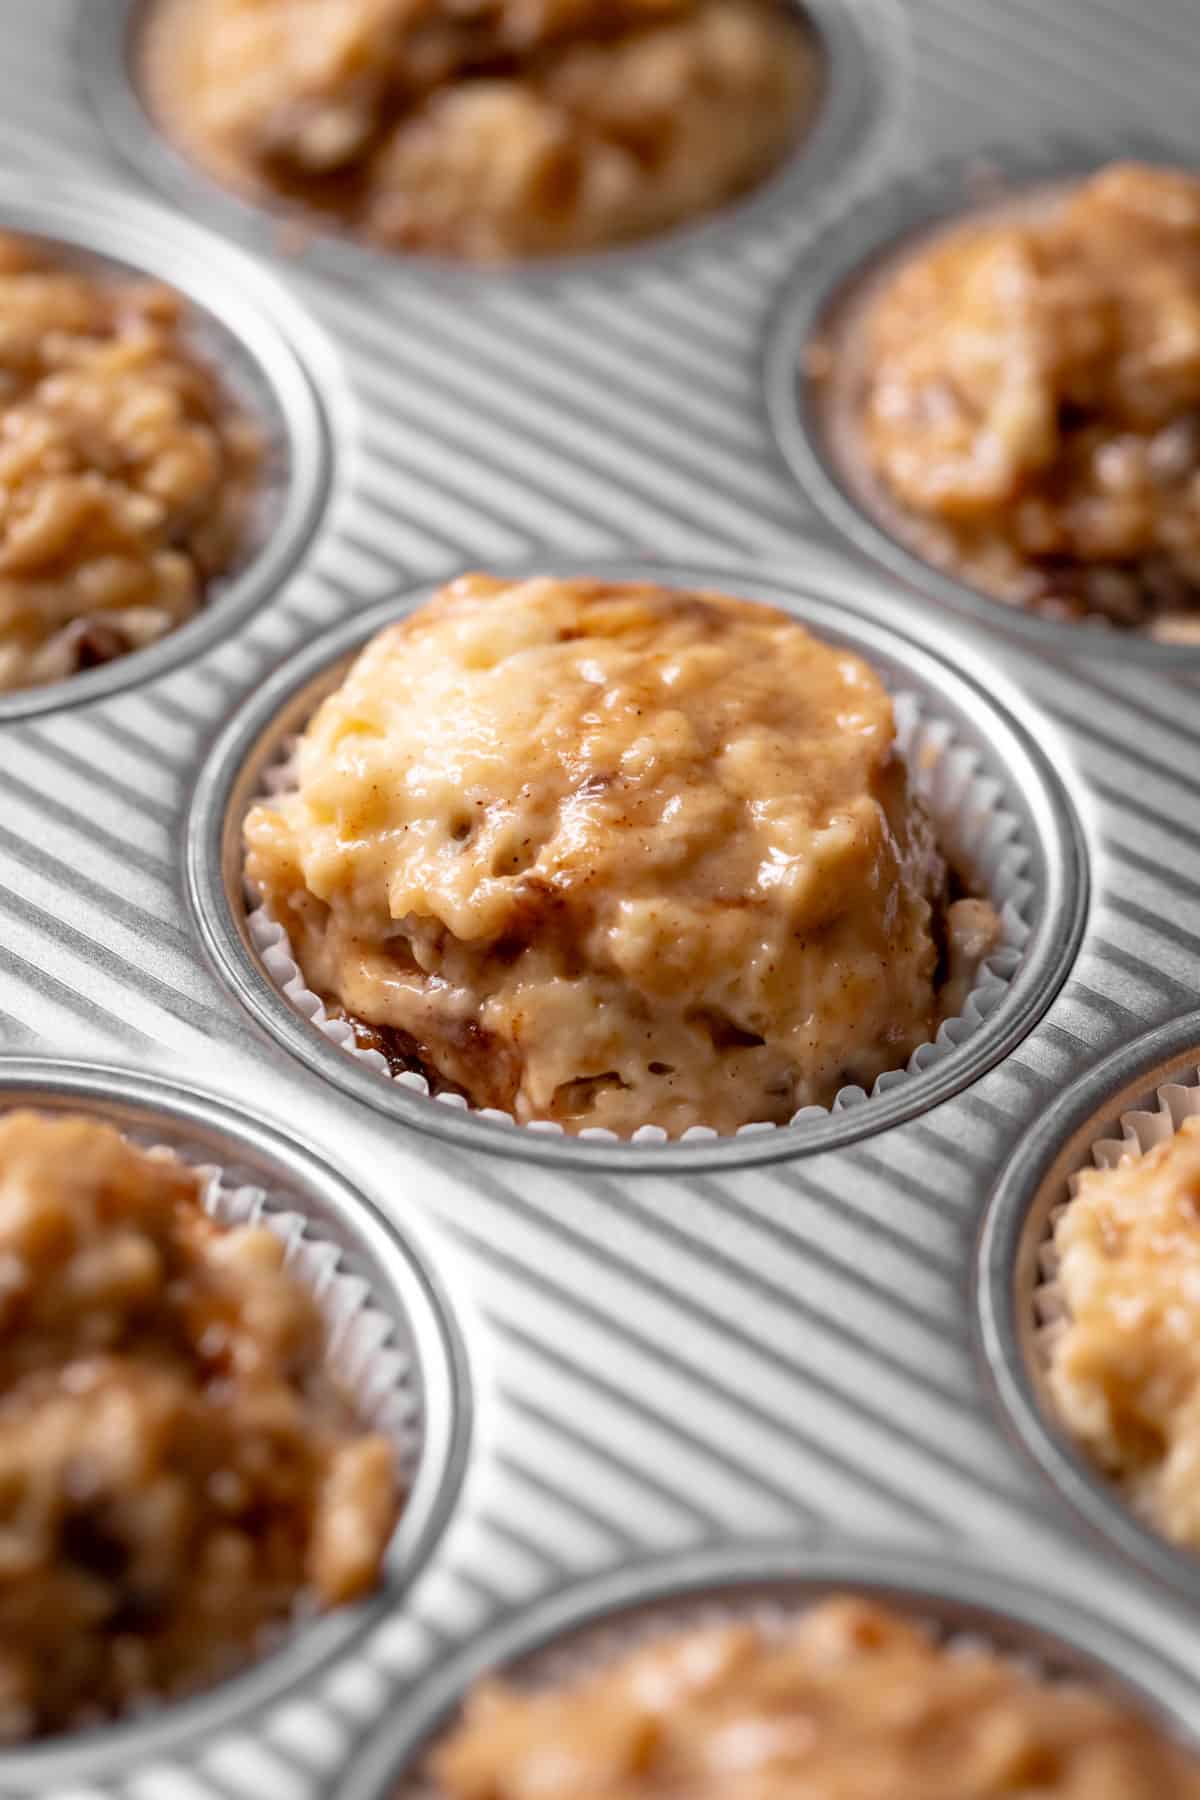 A muffin pan with the cinnamon batter scooped into the muffin liners.